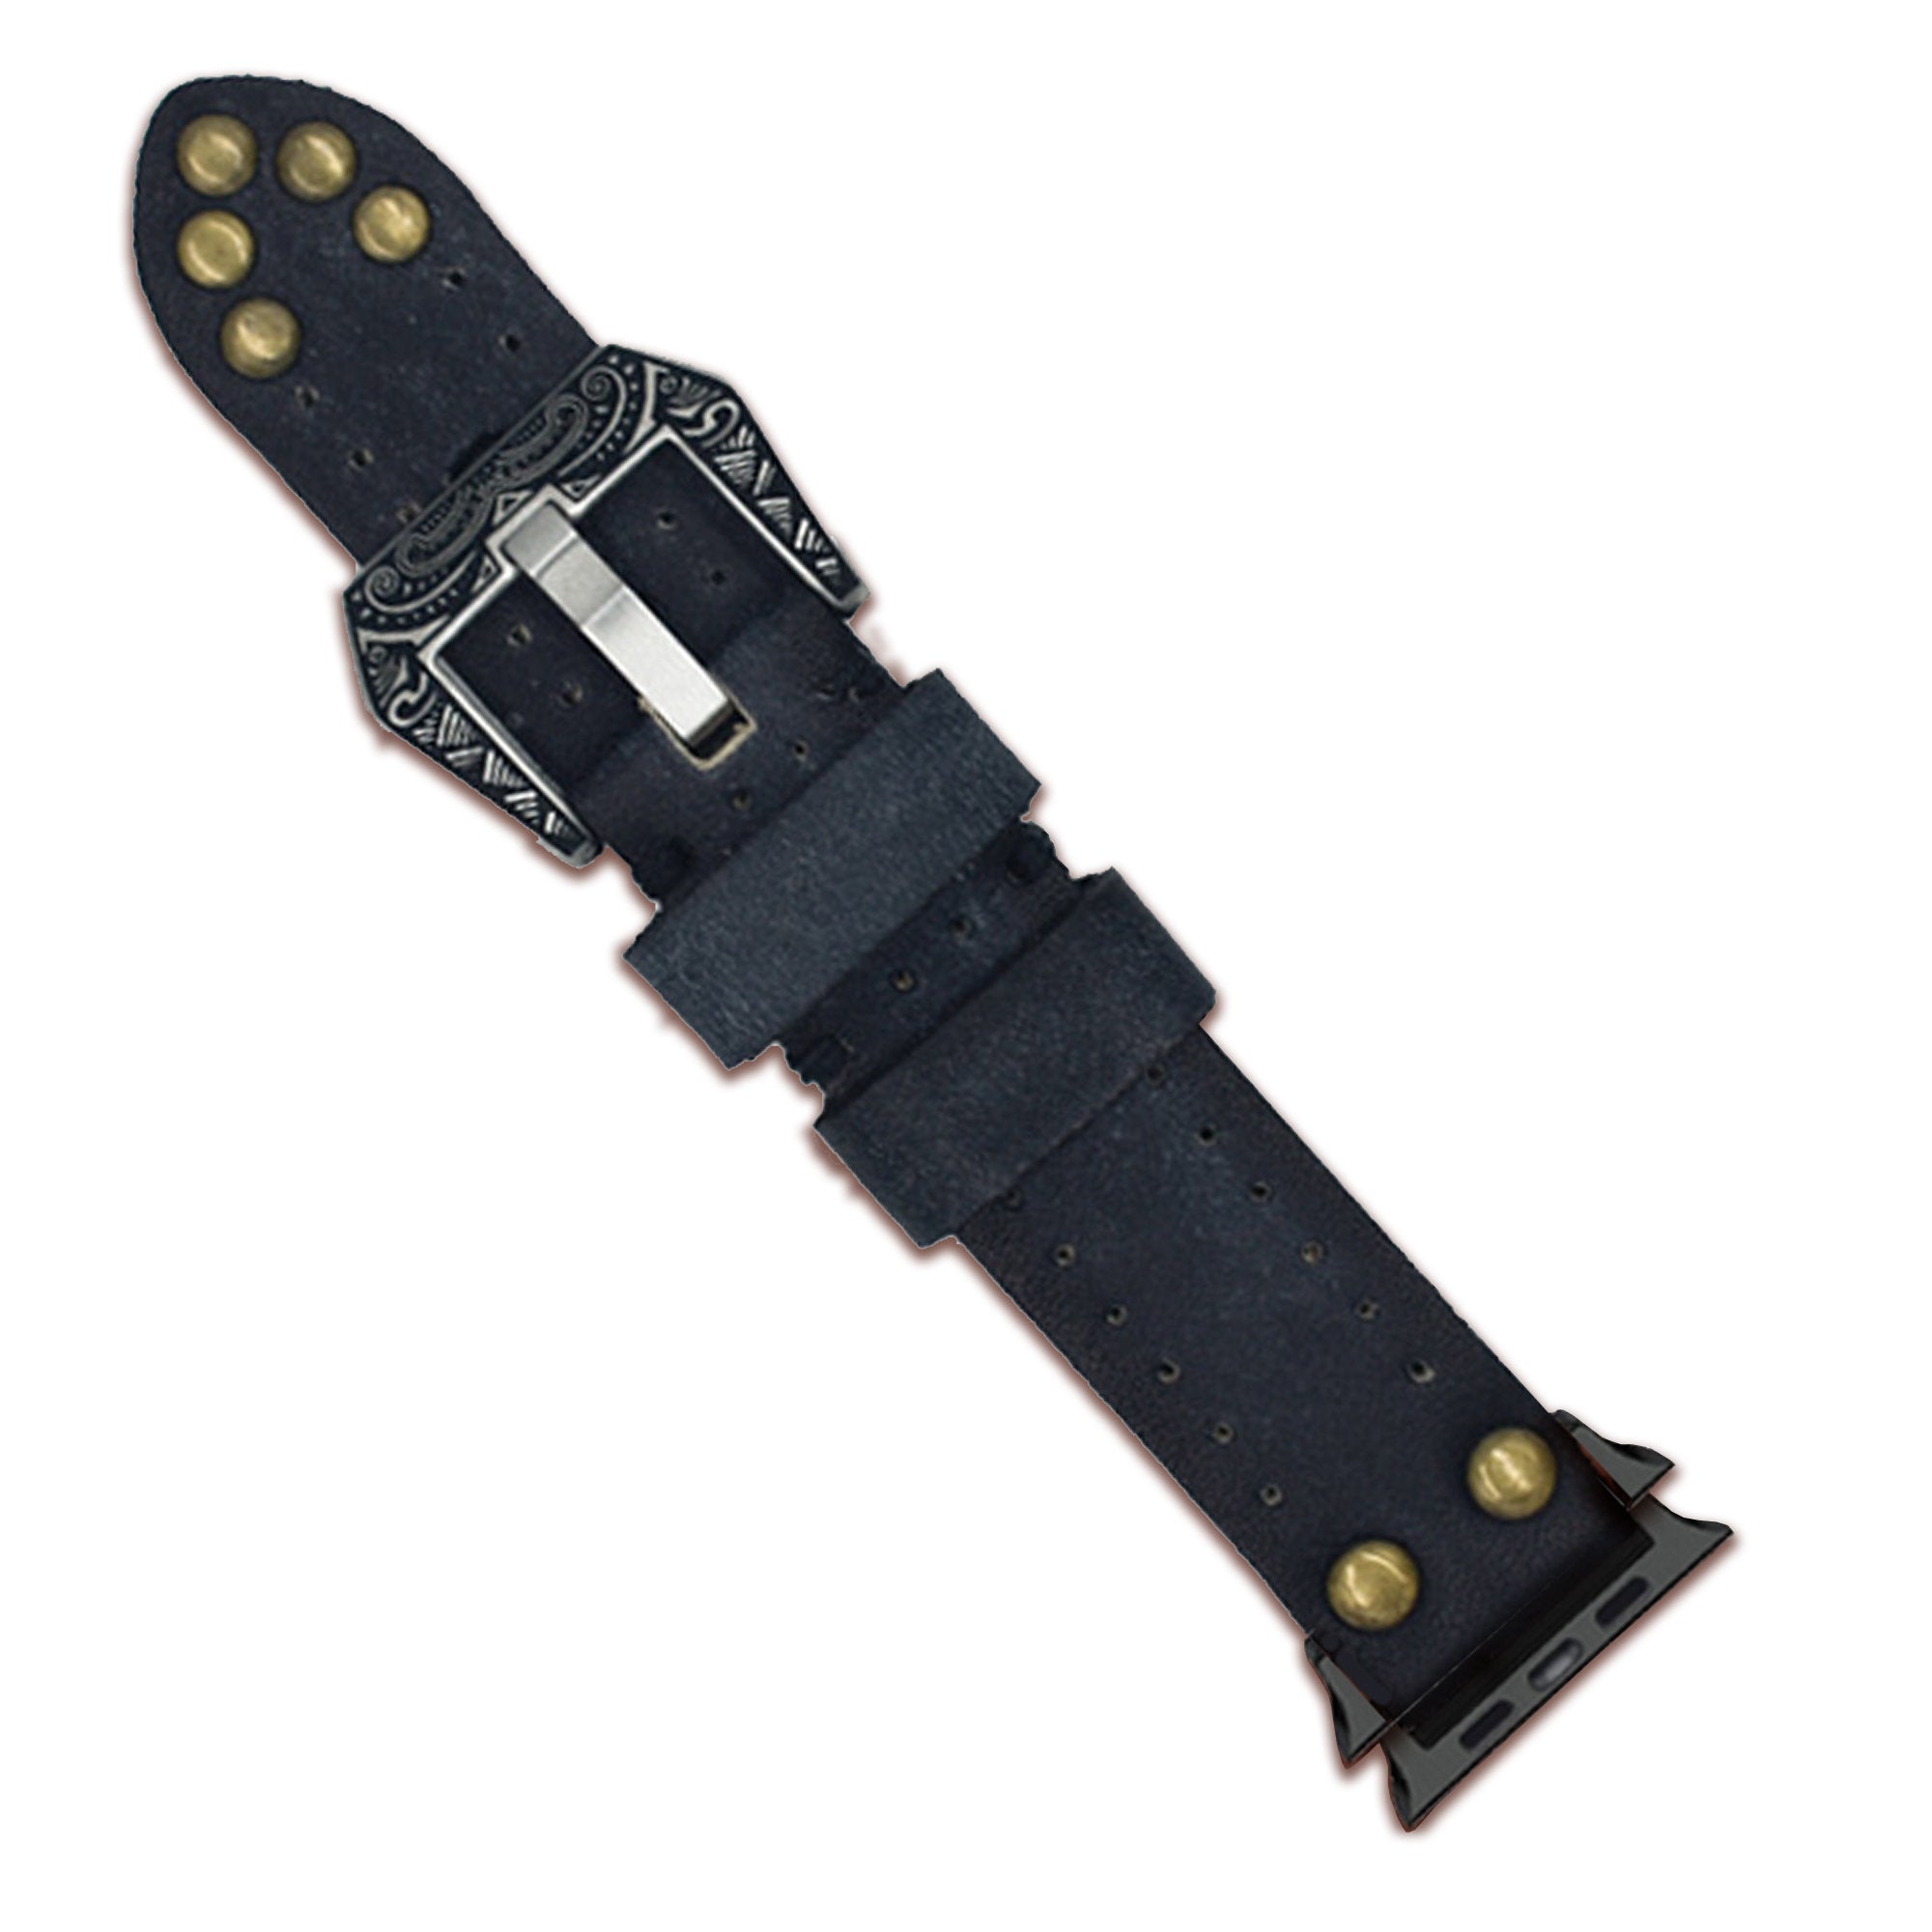 Handmade Vintage Leather Watch Band, Watch Strap, Crazy Cow Apple Watch Strap Apple Watch Band 42mm 44mm - Free Shipping!